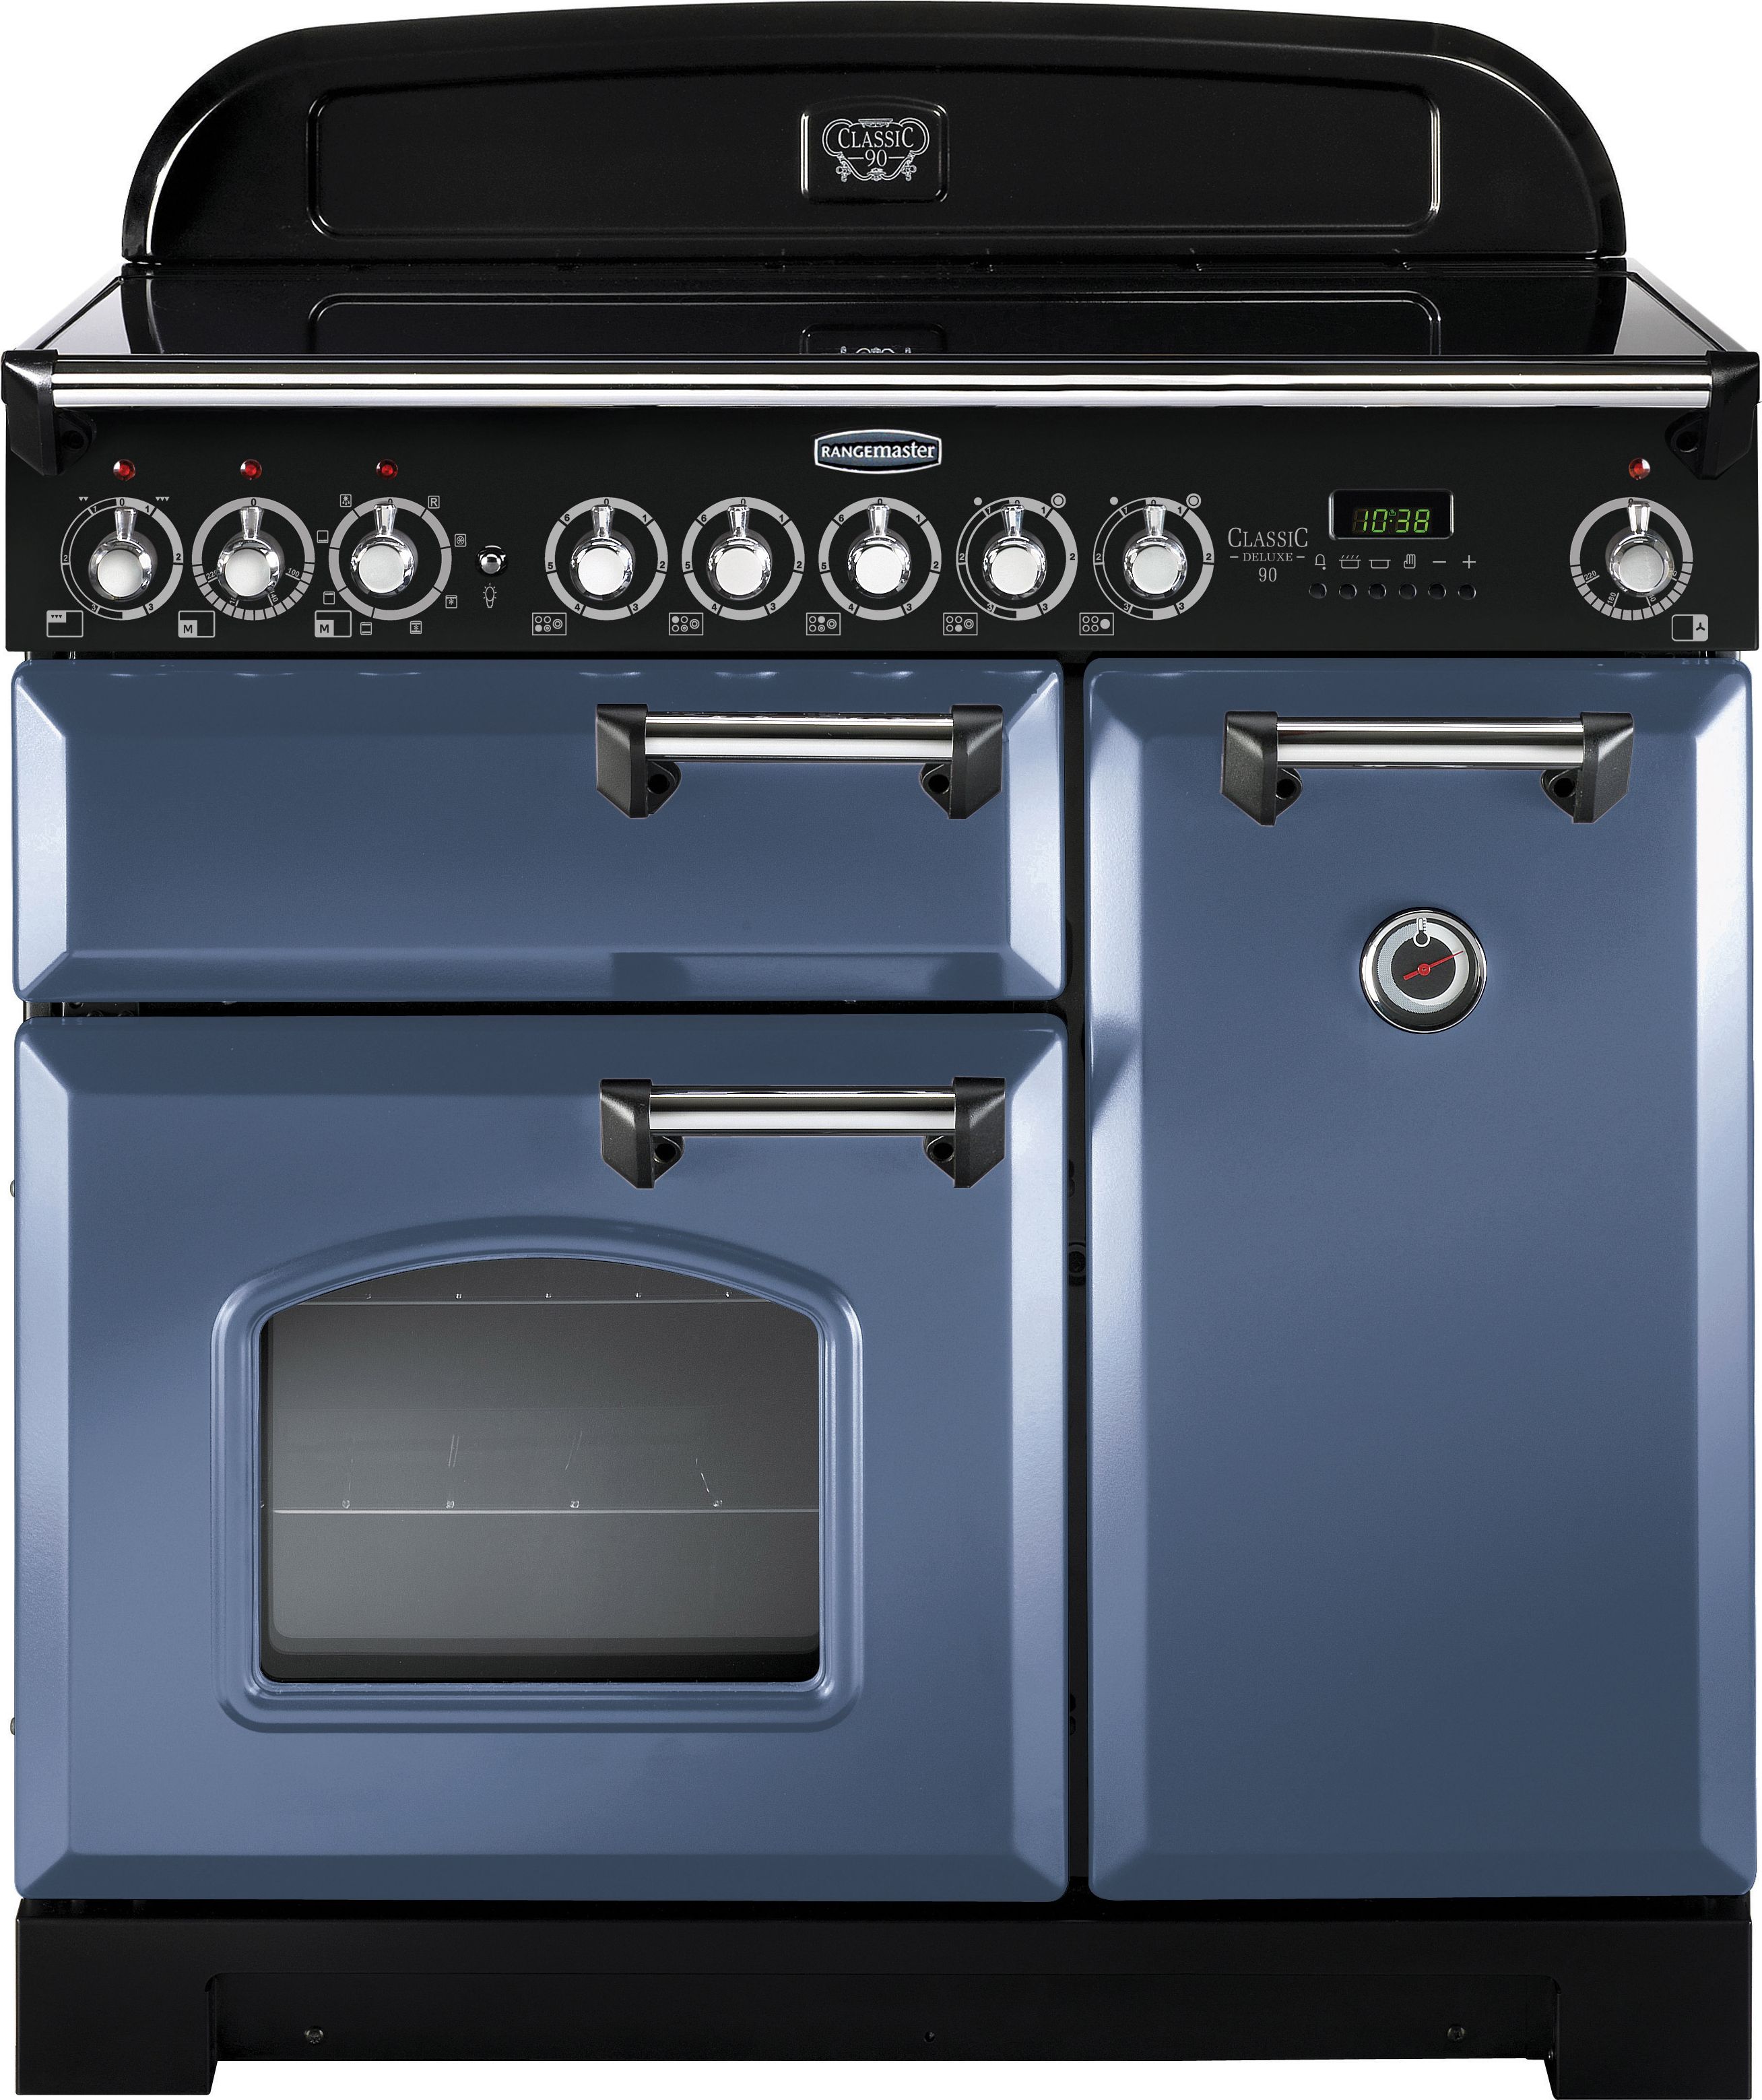 Rangemaster Classic Deluxe CDL90ECSB/C 90cm Electric Range Cooker with Ceramic Hob - Stone Blue / Chrome - A/A Rated, Blue